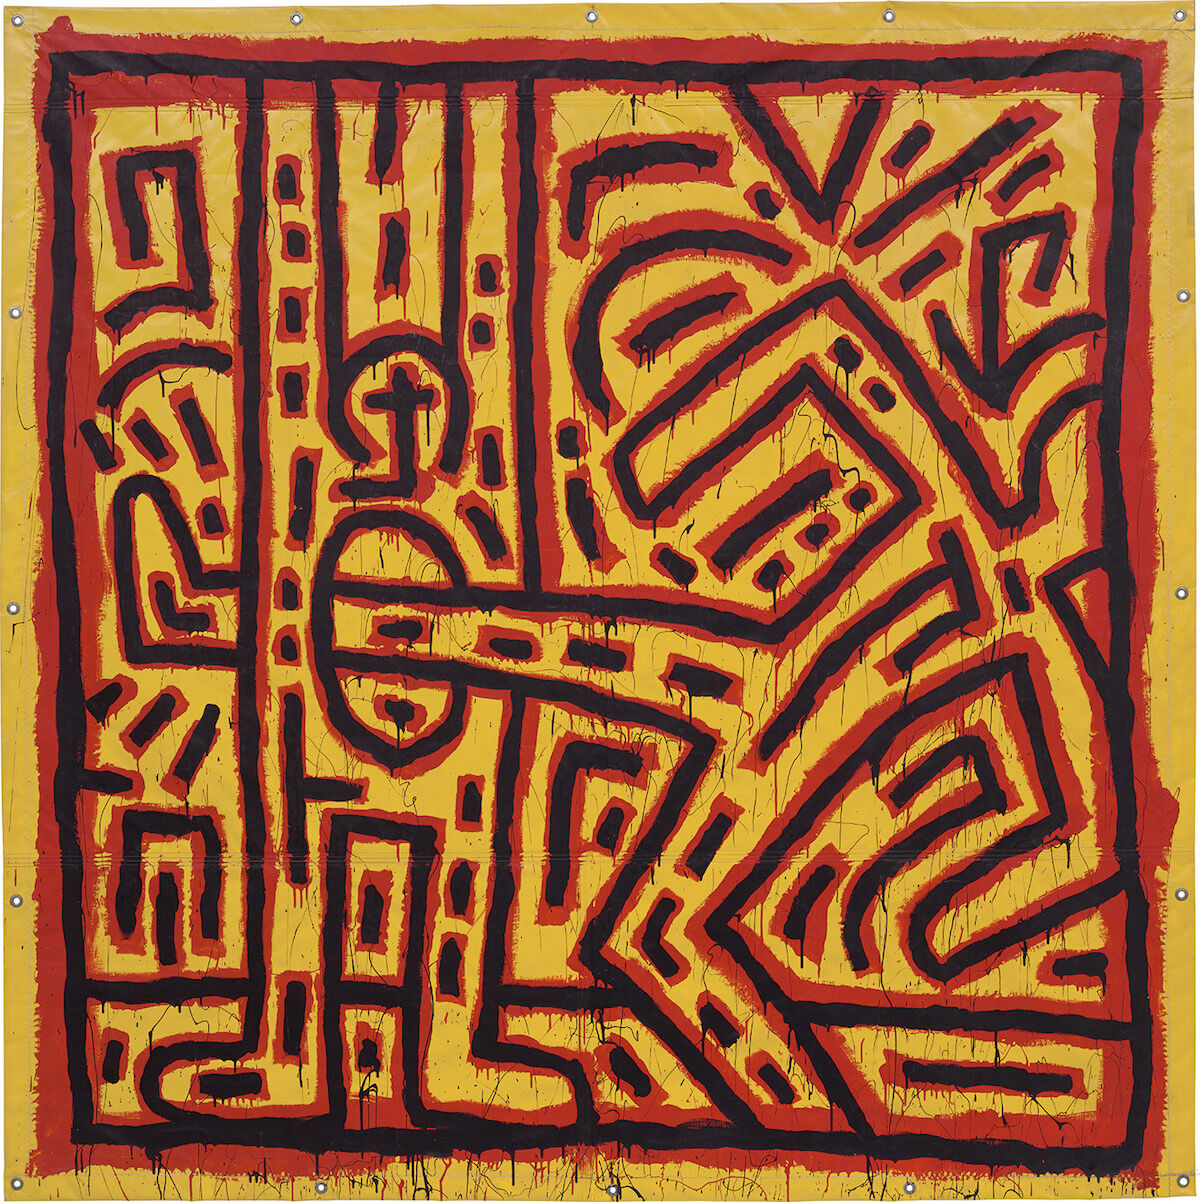 Keith Haring, Untitled, 1981. Sold for £3.2 million ($4.1 million). Courtesy Phillips.